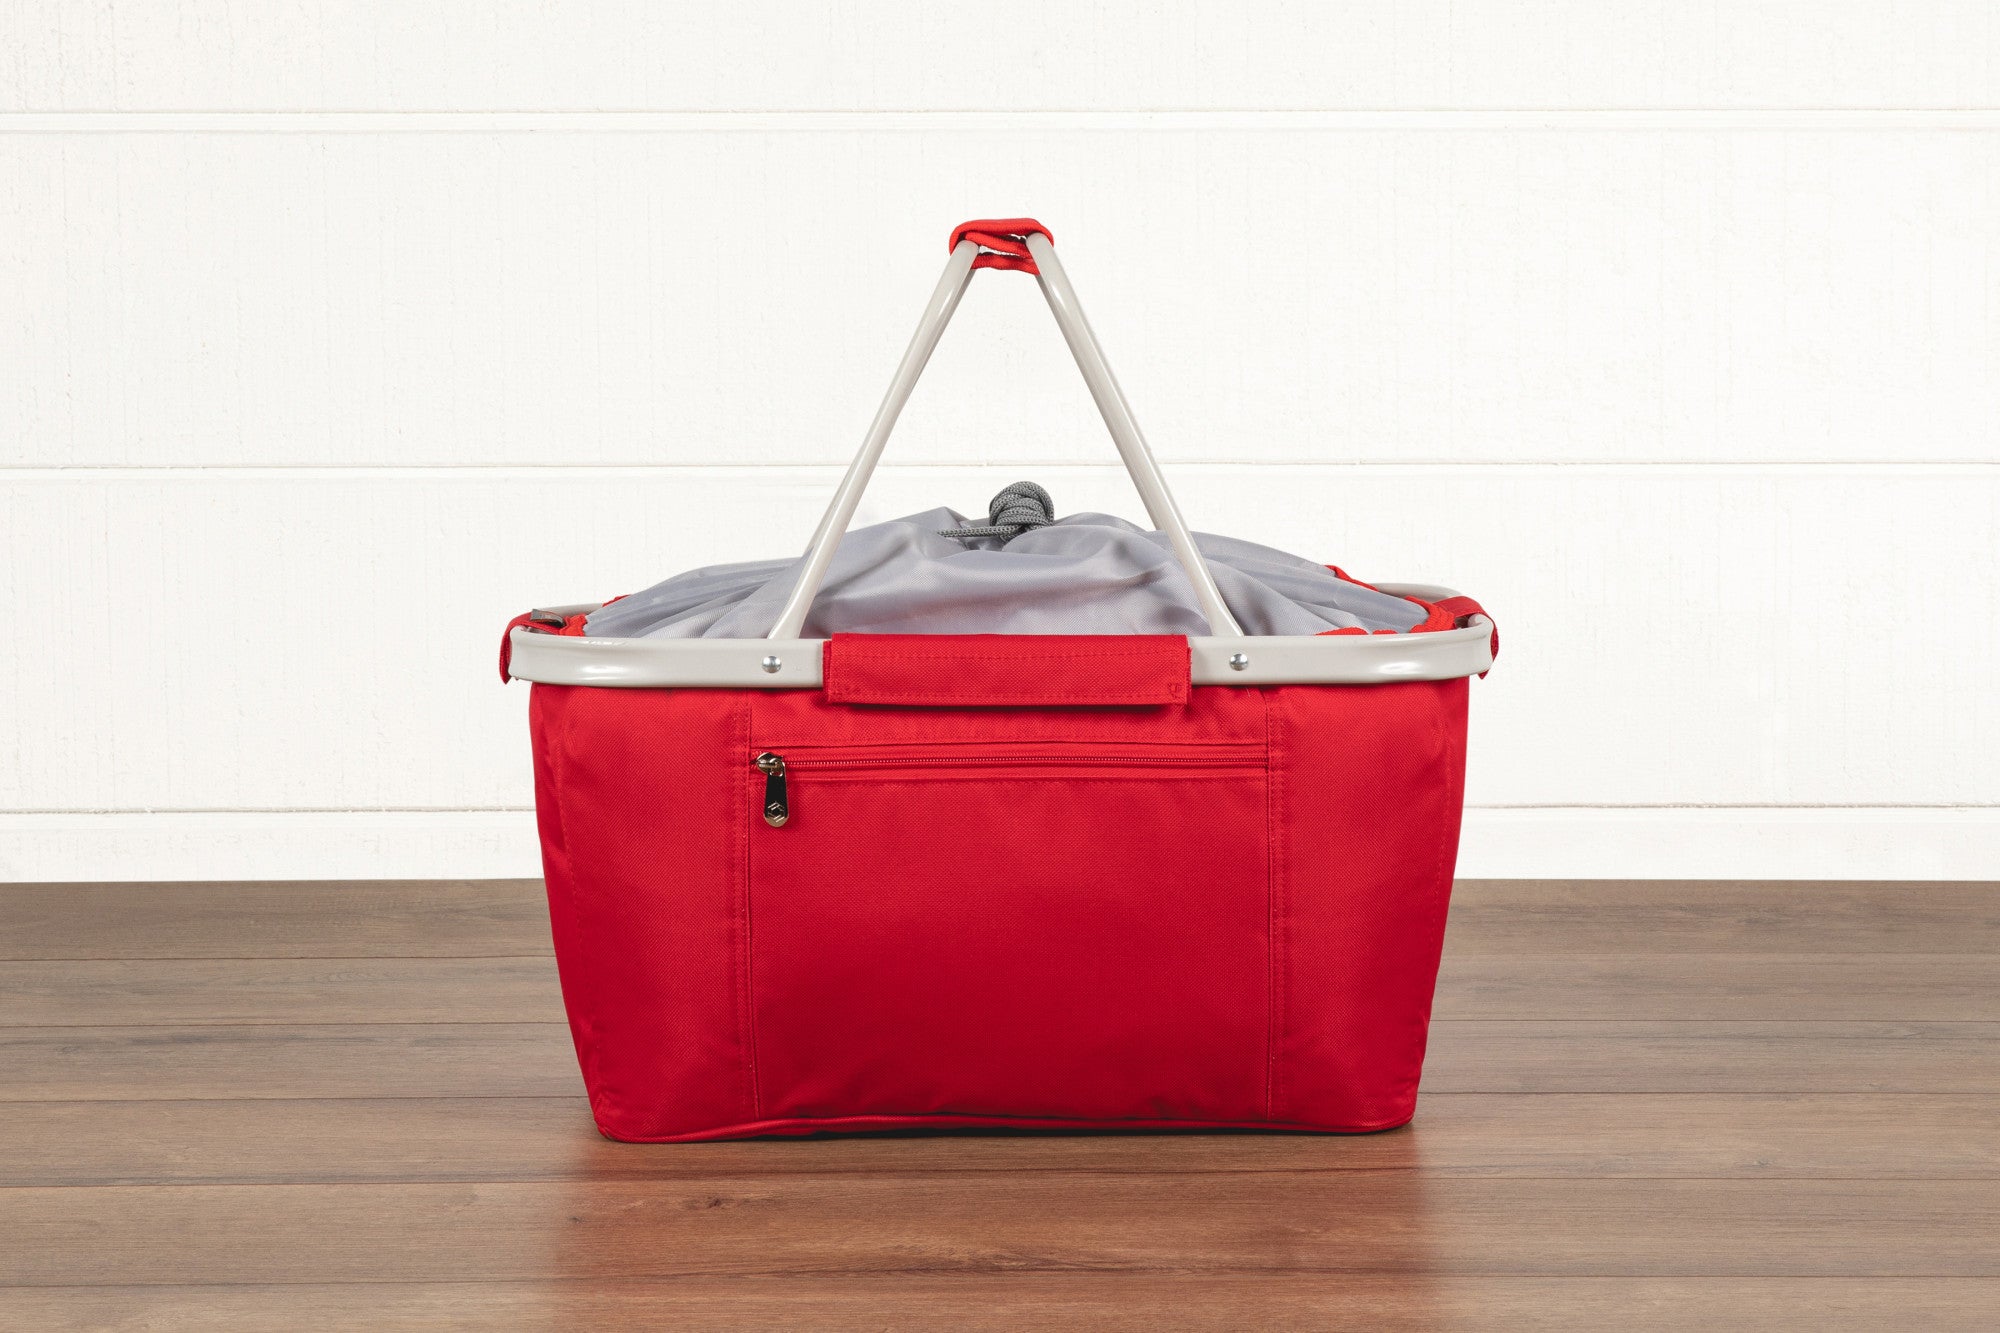 NC State Wolfpack - Metro Basket Collapsible Cooler Tote